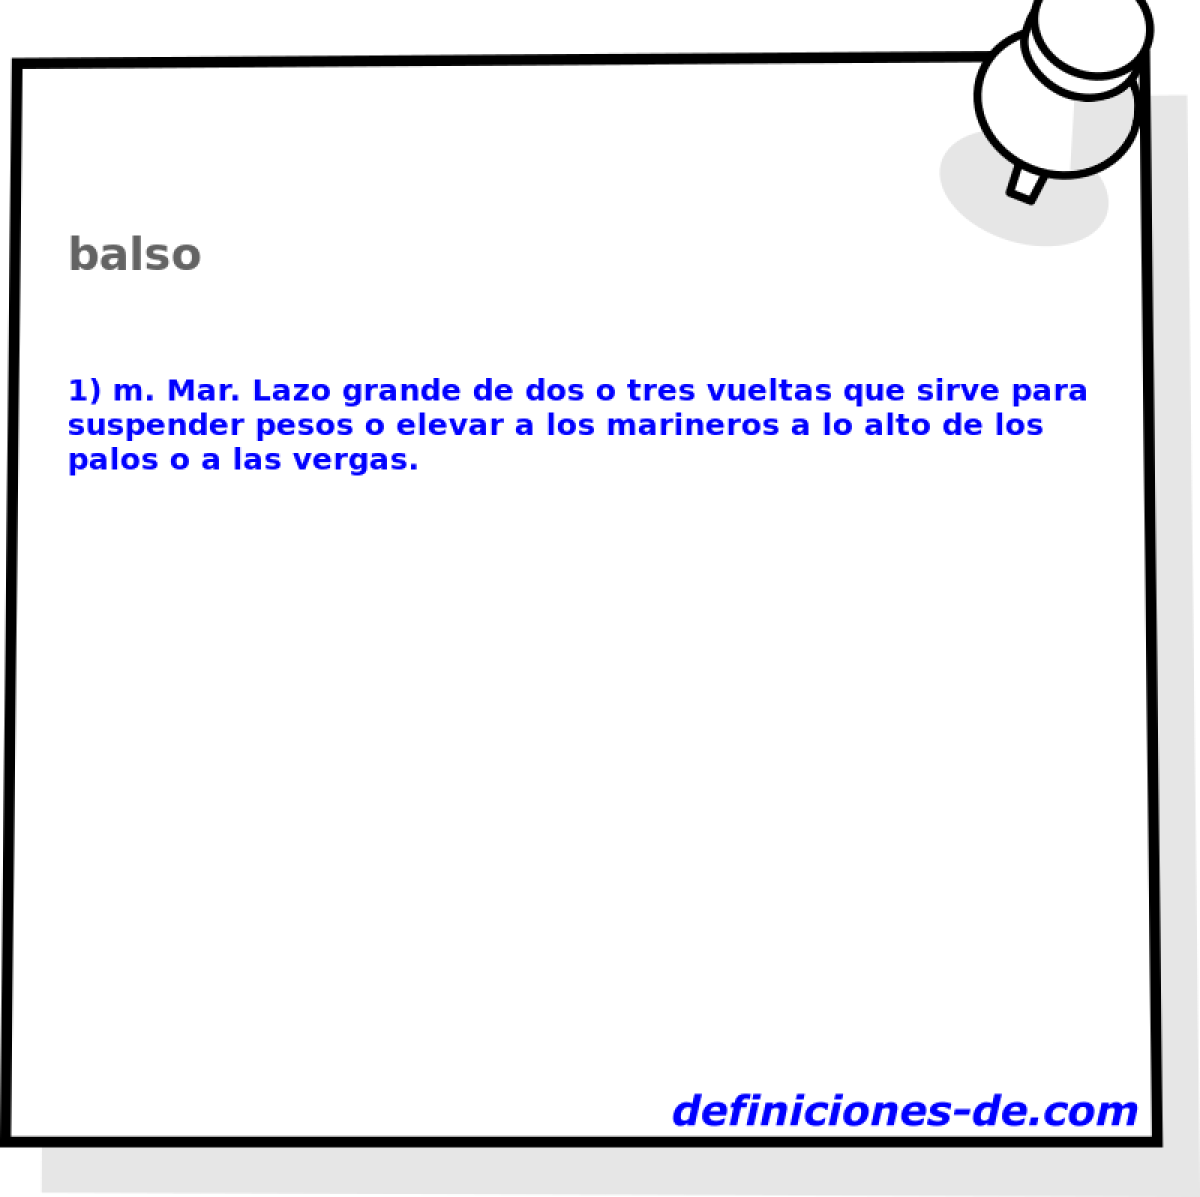 balso 